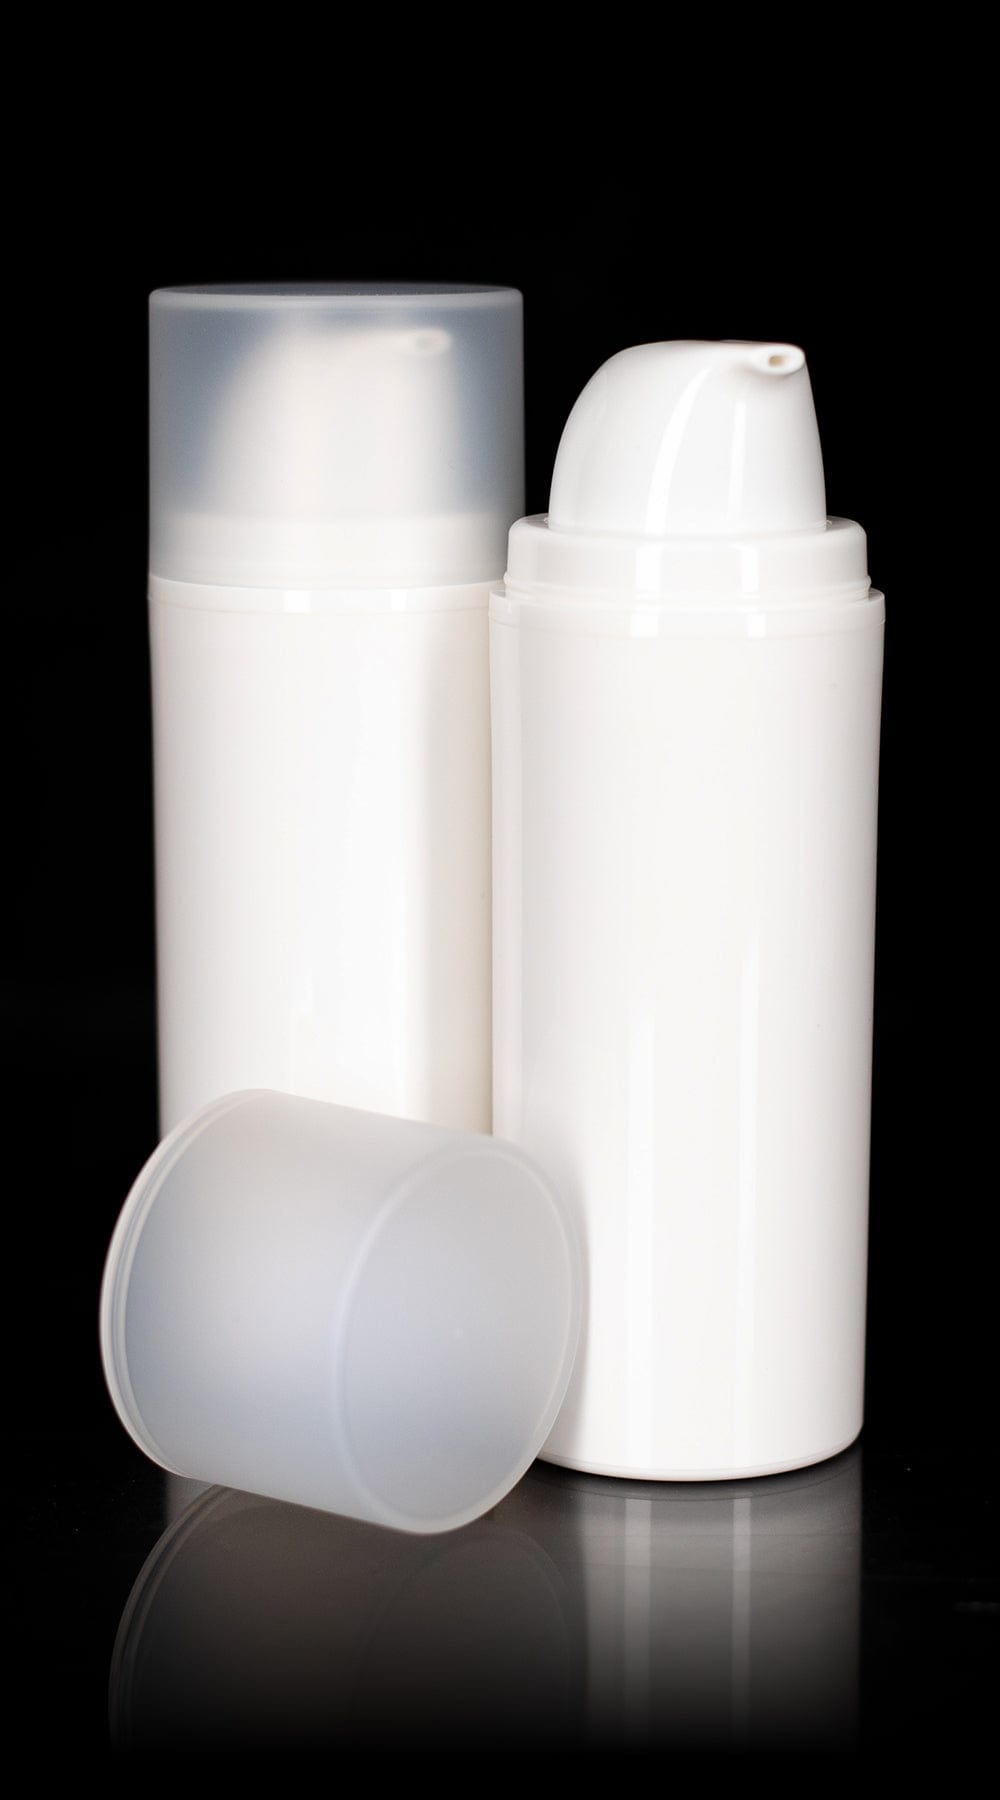 Pure 100 ML White PP Airless Bottle with Frosted Cap - Cosmetic Packaging Now